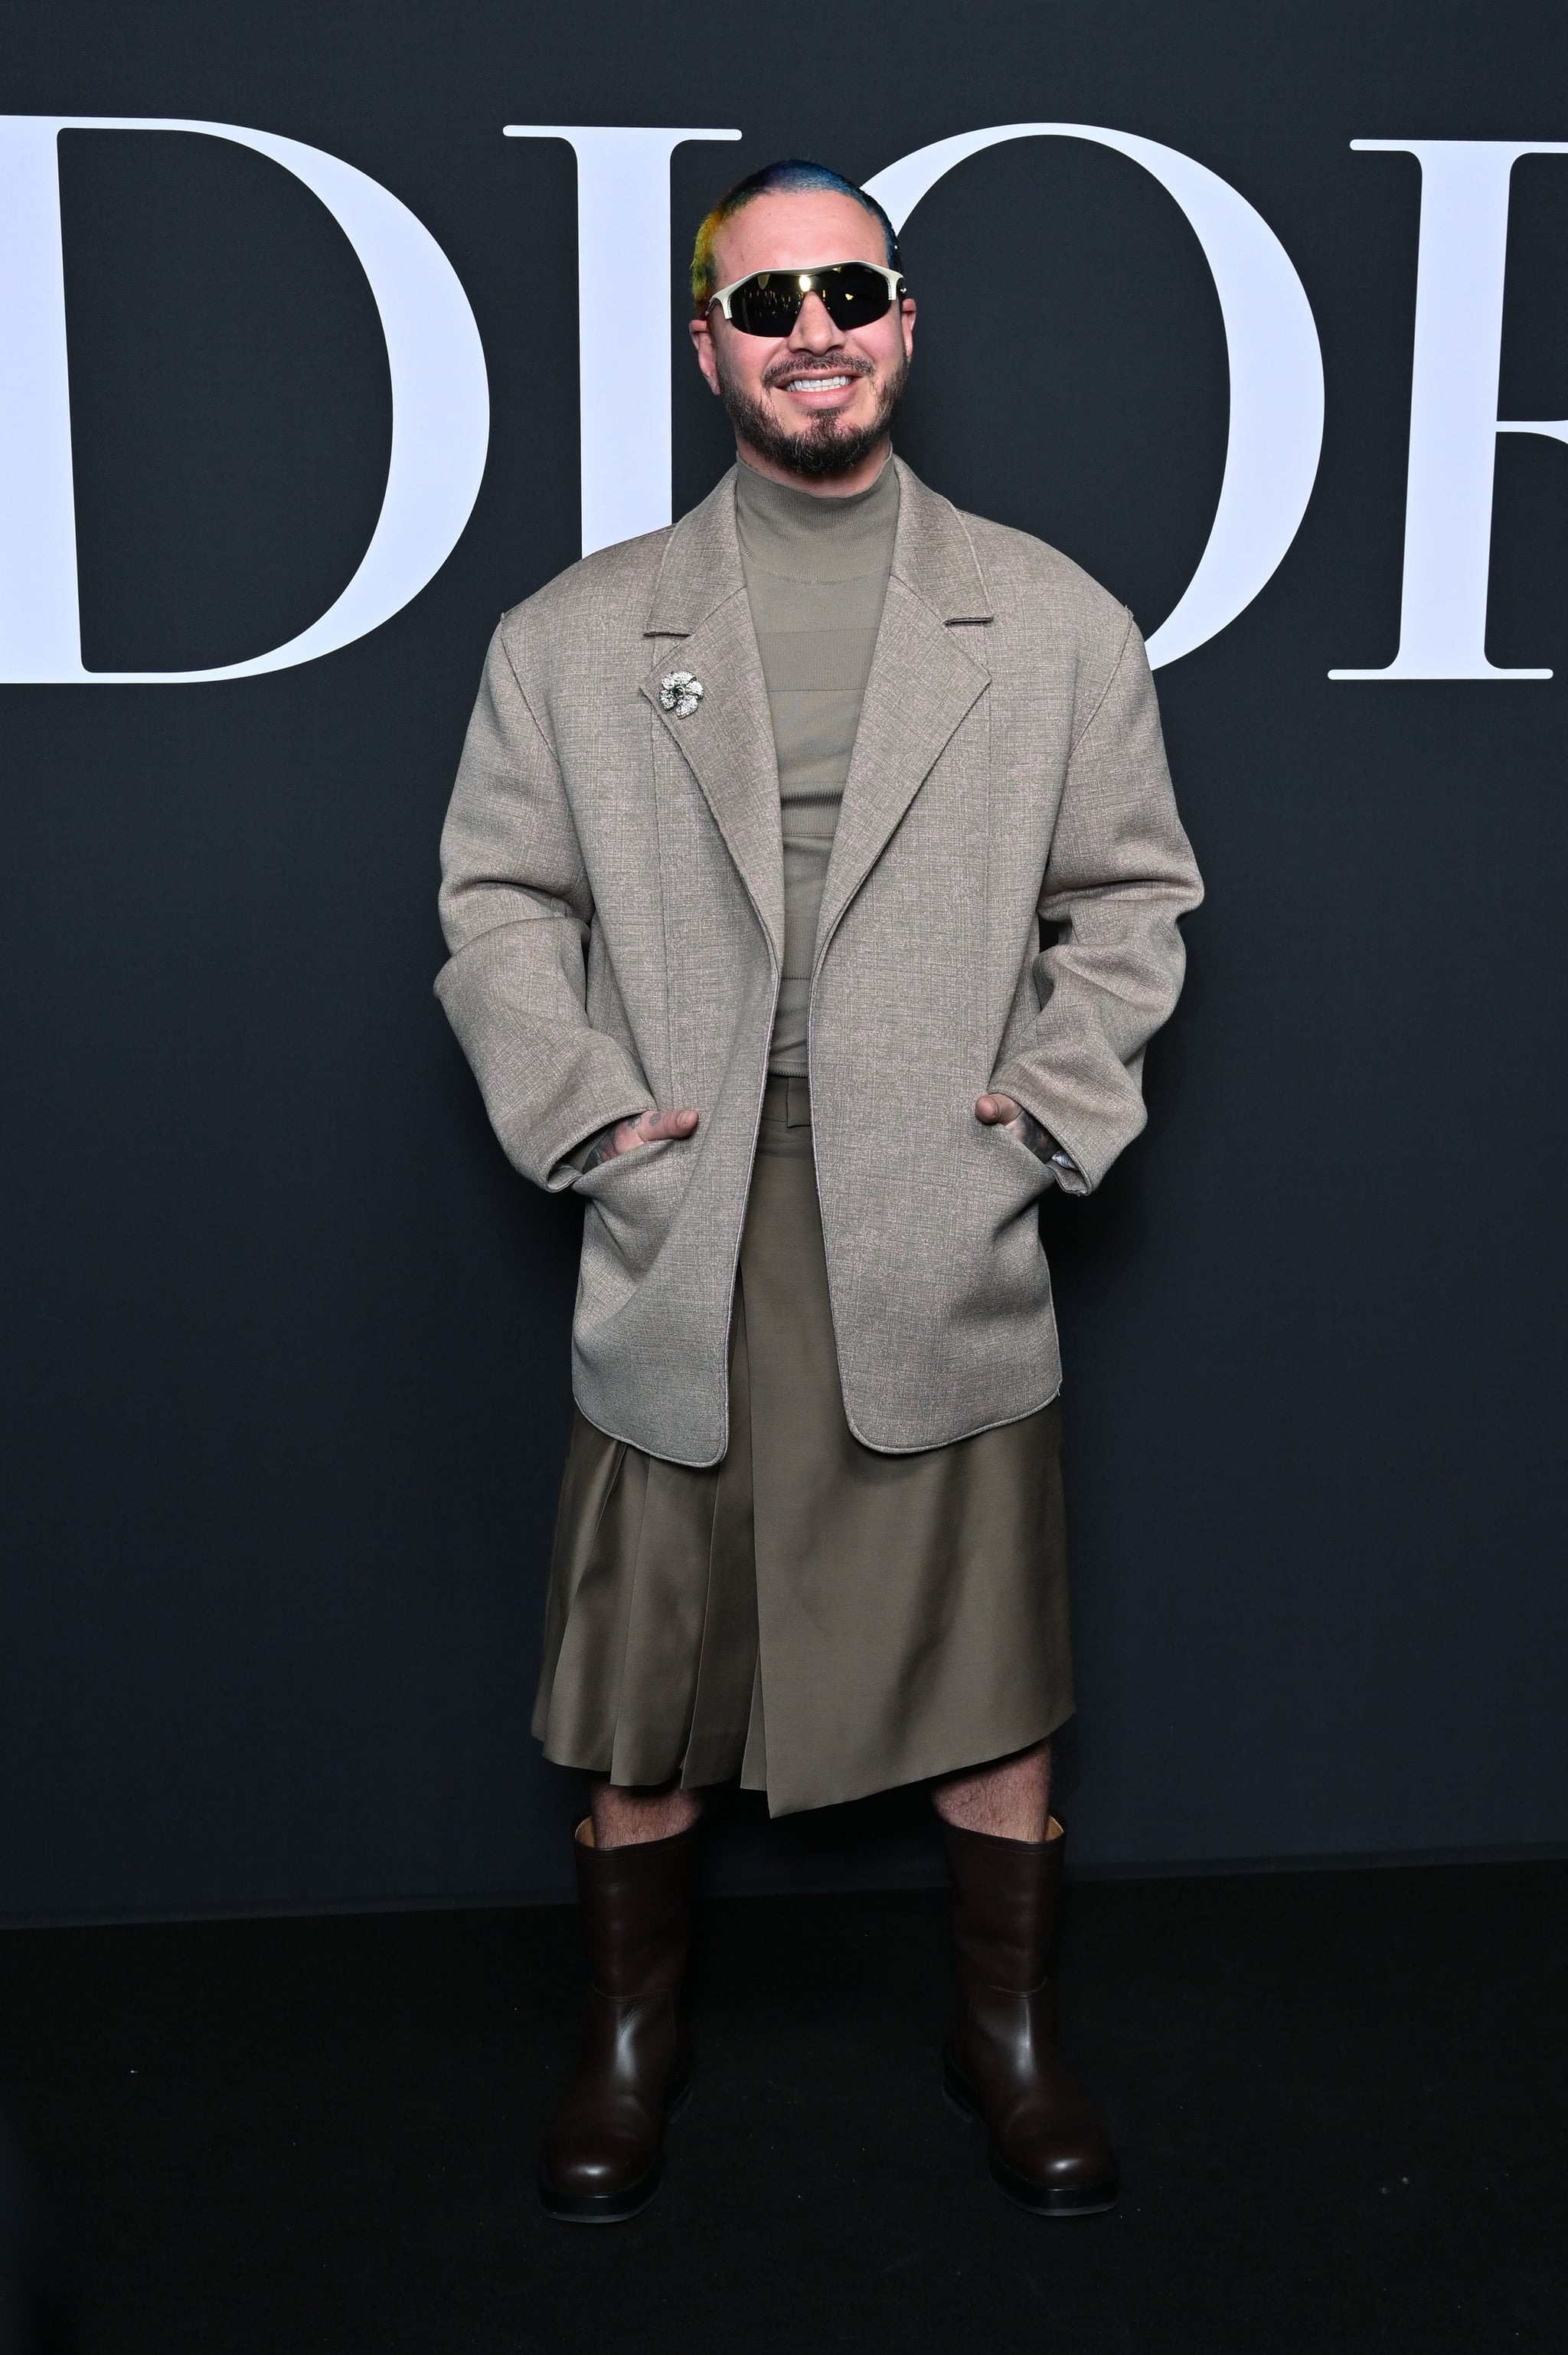 J Balvin at the Dior Homme Menswear Fall 2023 Show, Heartstopper's Kit  Connor Cements his Fashion Status at the Loewe Show in Leather Joggers